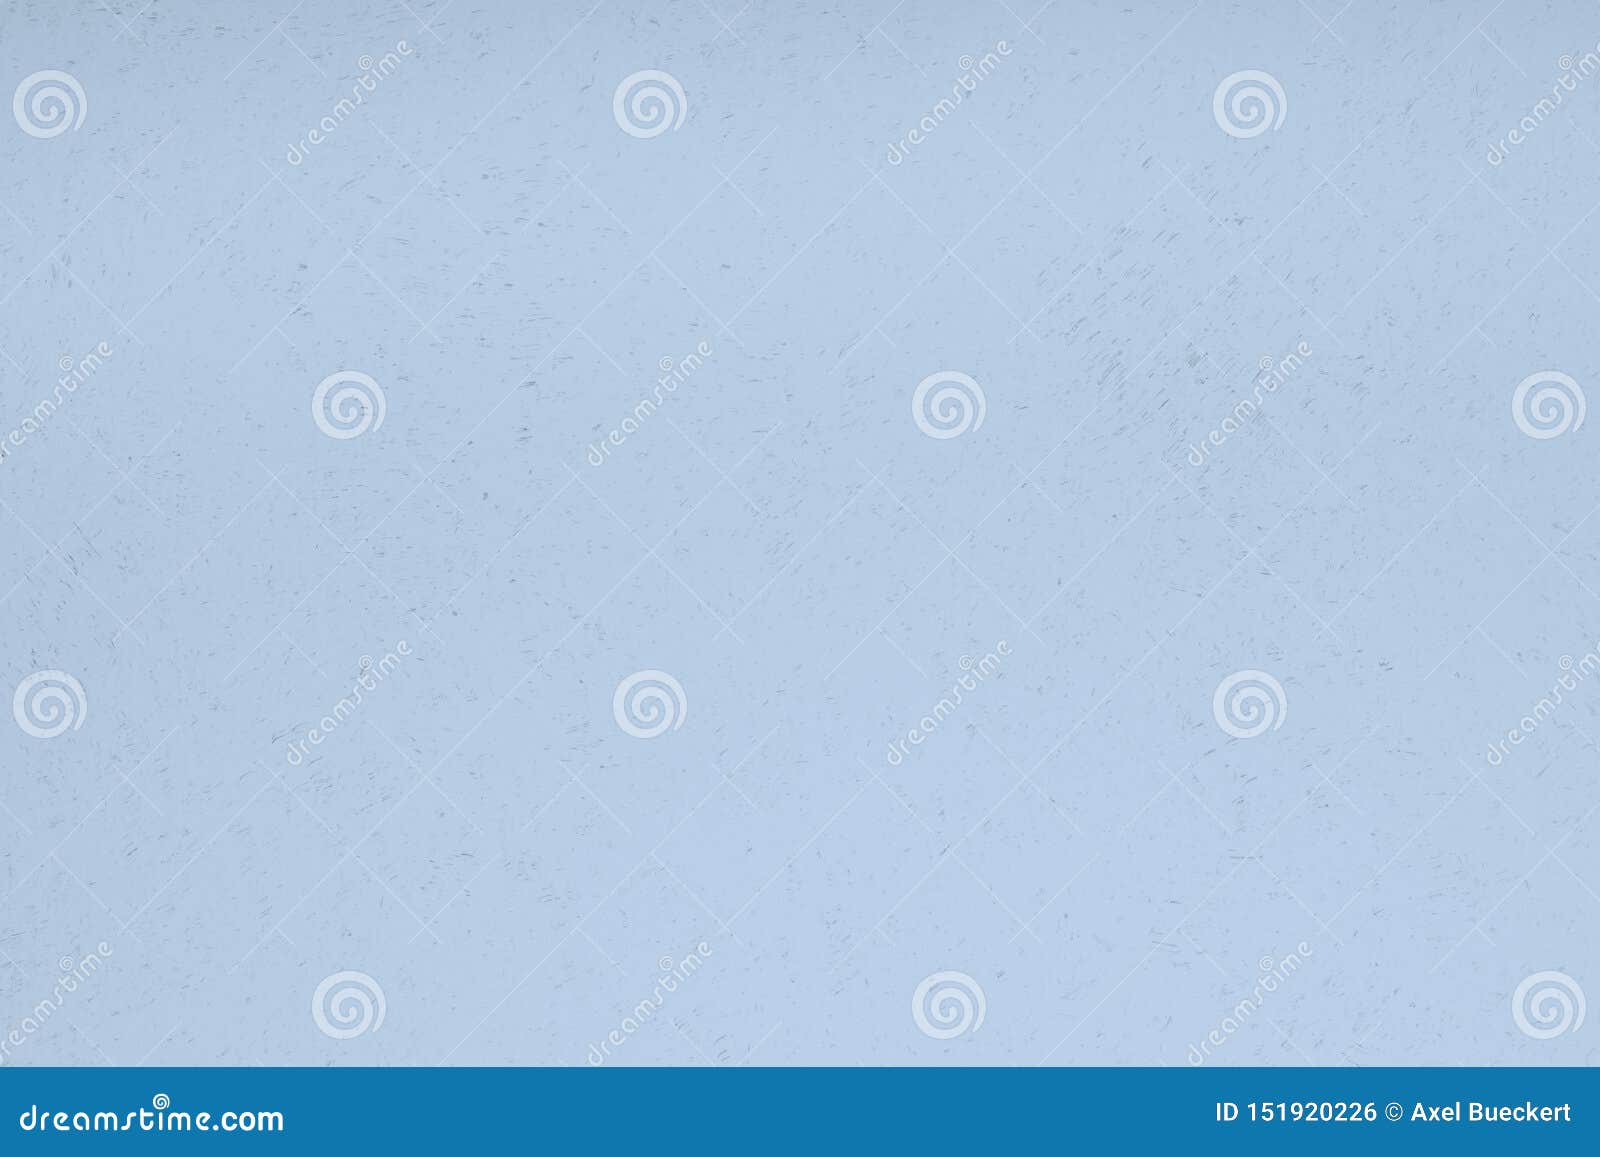 Light Blue Distressed Paint Texture Background Stock Photo - Image of ...